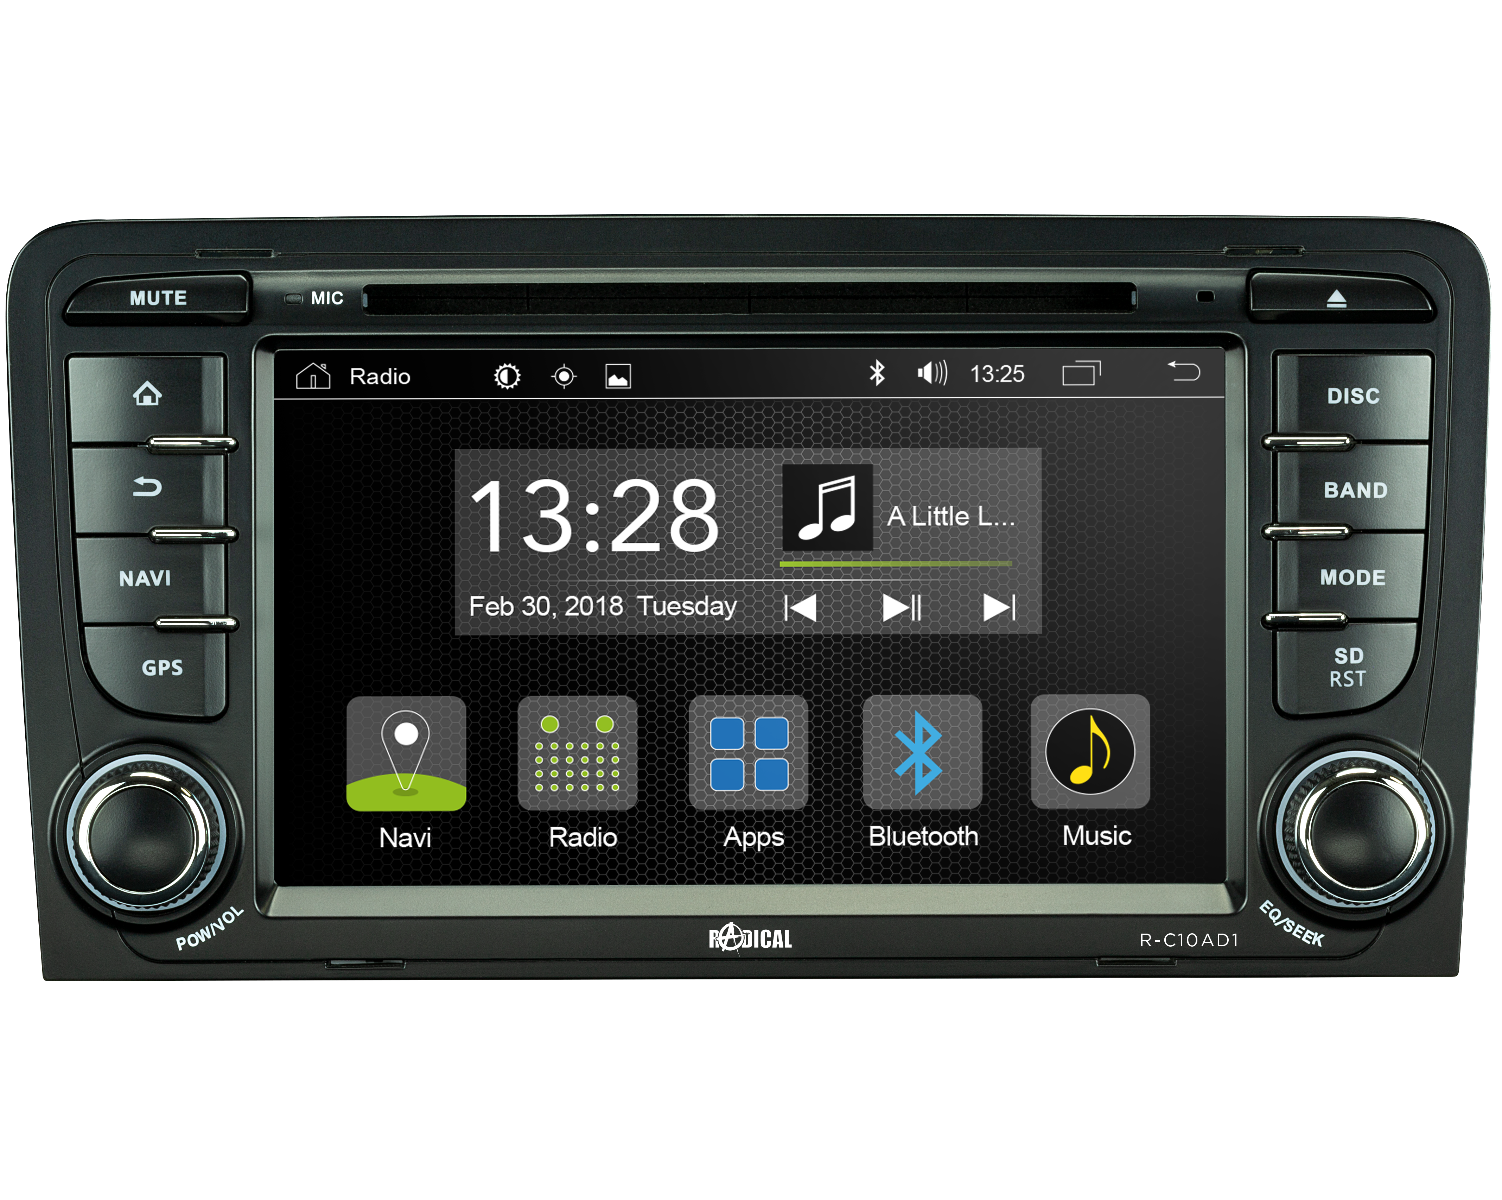 RADICAL R-C10AD1 Audi A3 Infotainment Android T8